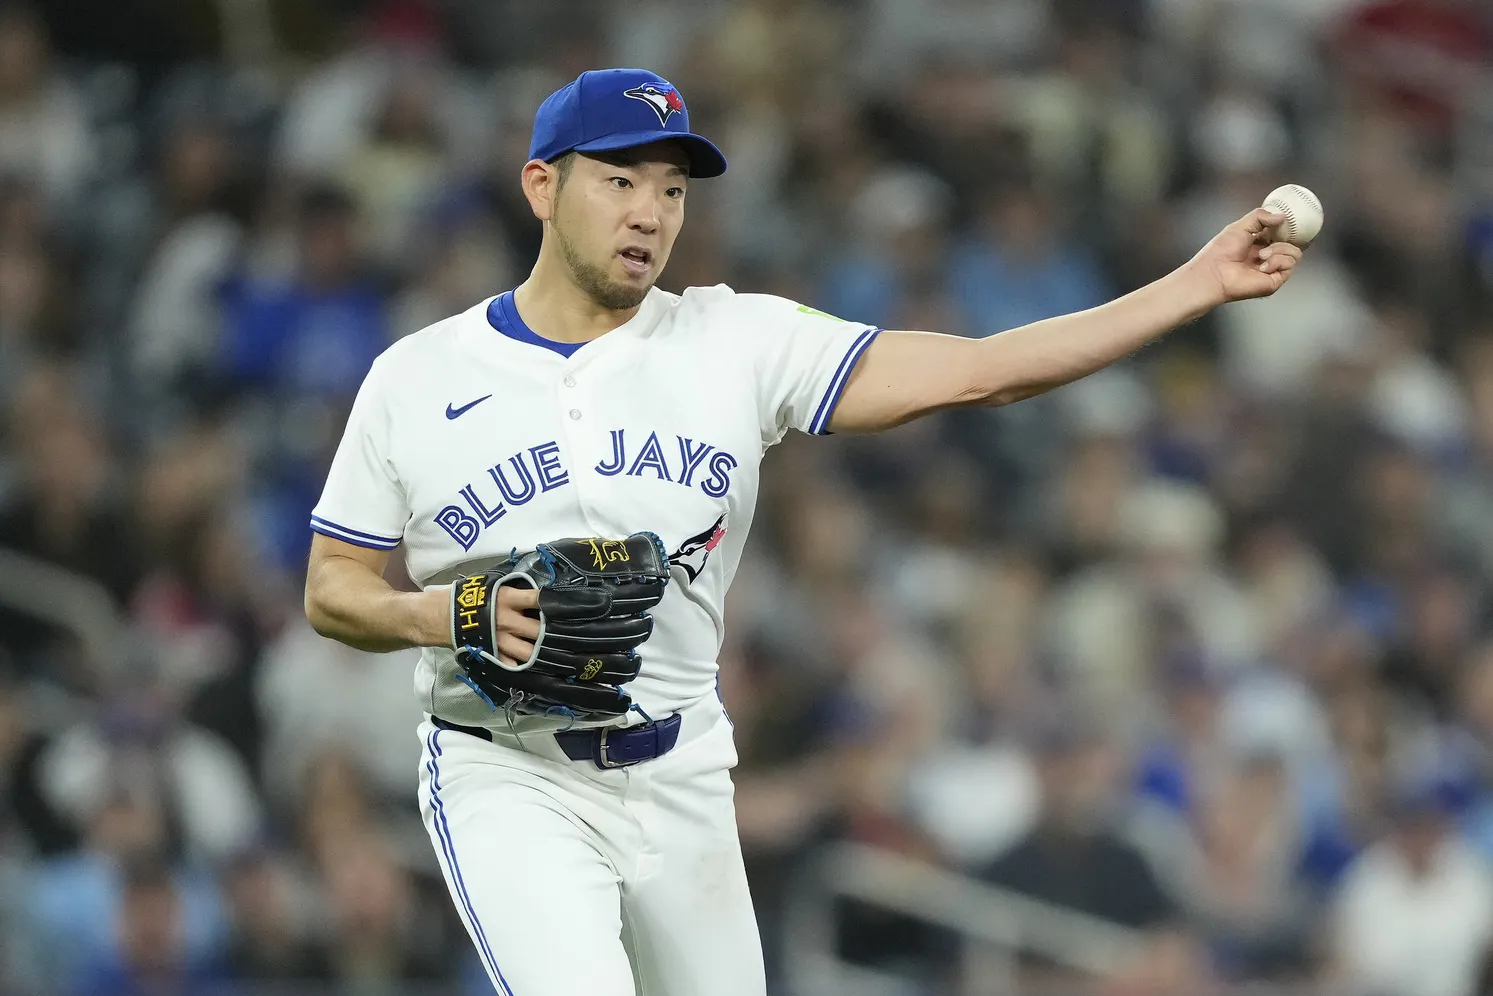 Toronto Blue Jays starting pitcher Yusei Kikuchi (16) throws out New York Yankees third baseman Oswaldo Cabrera (not pictured) at first base on a ground ball during the second inning at Rogers Centre.